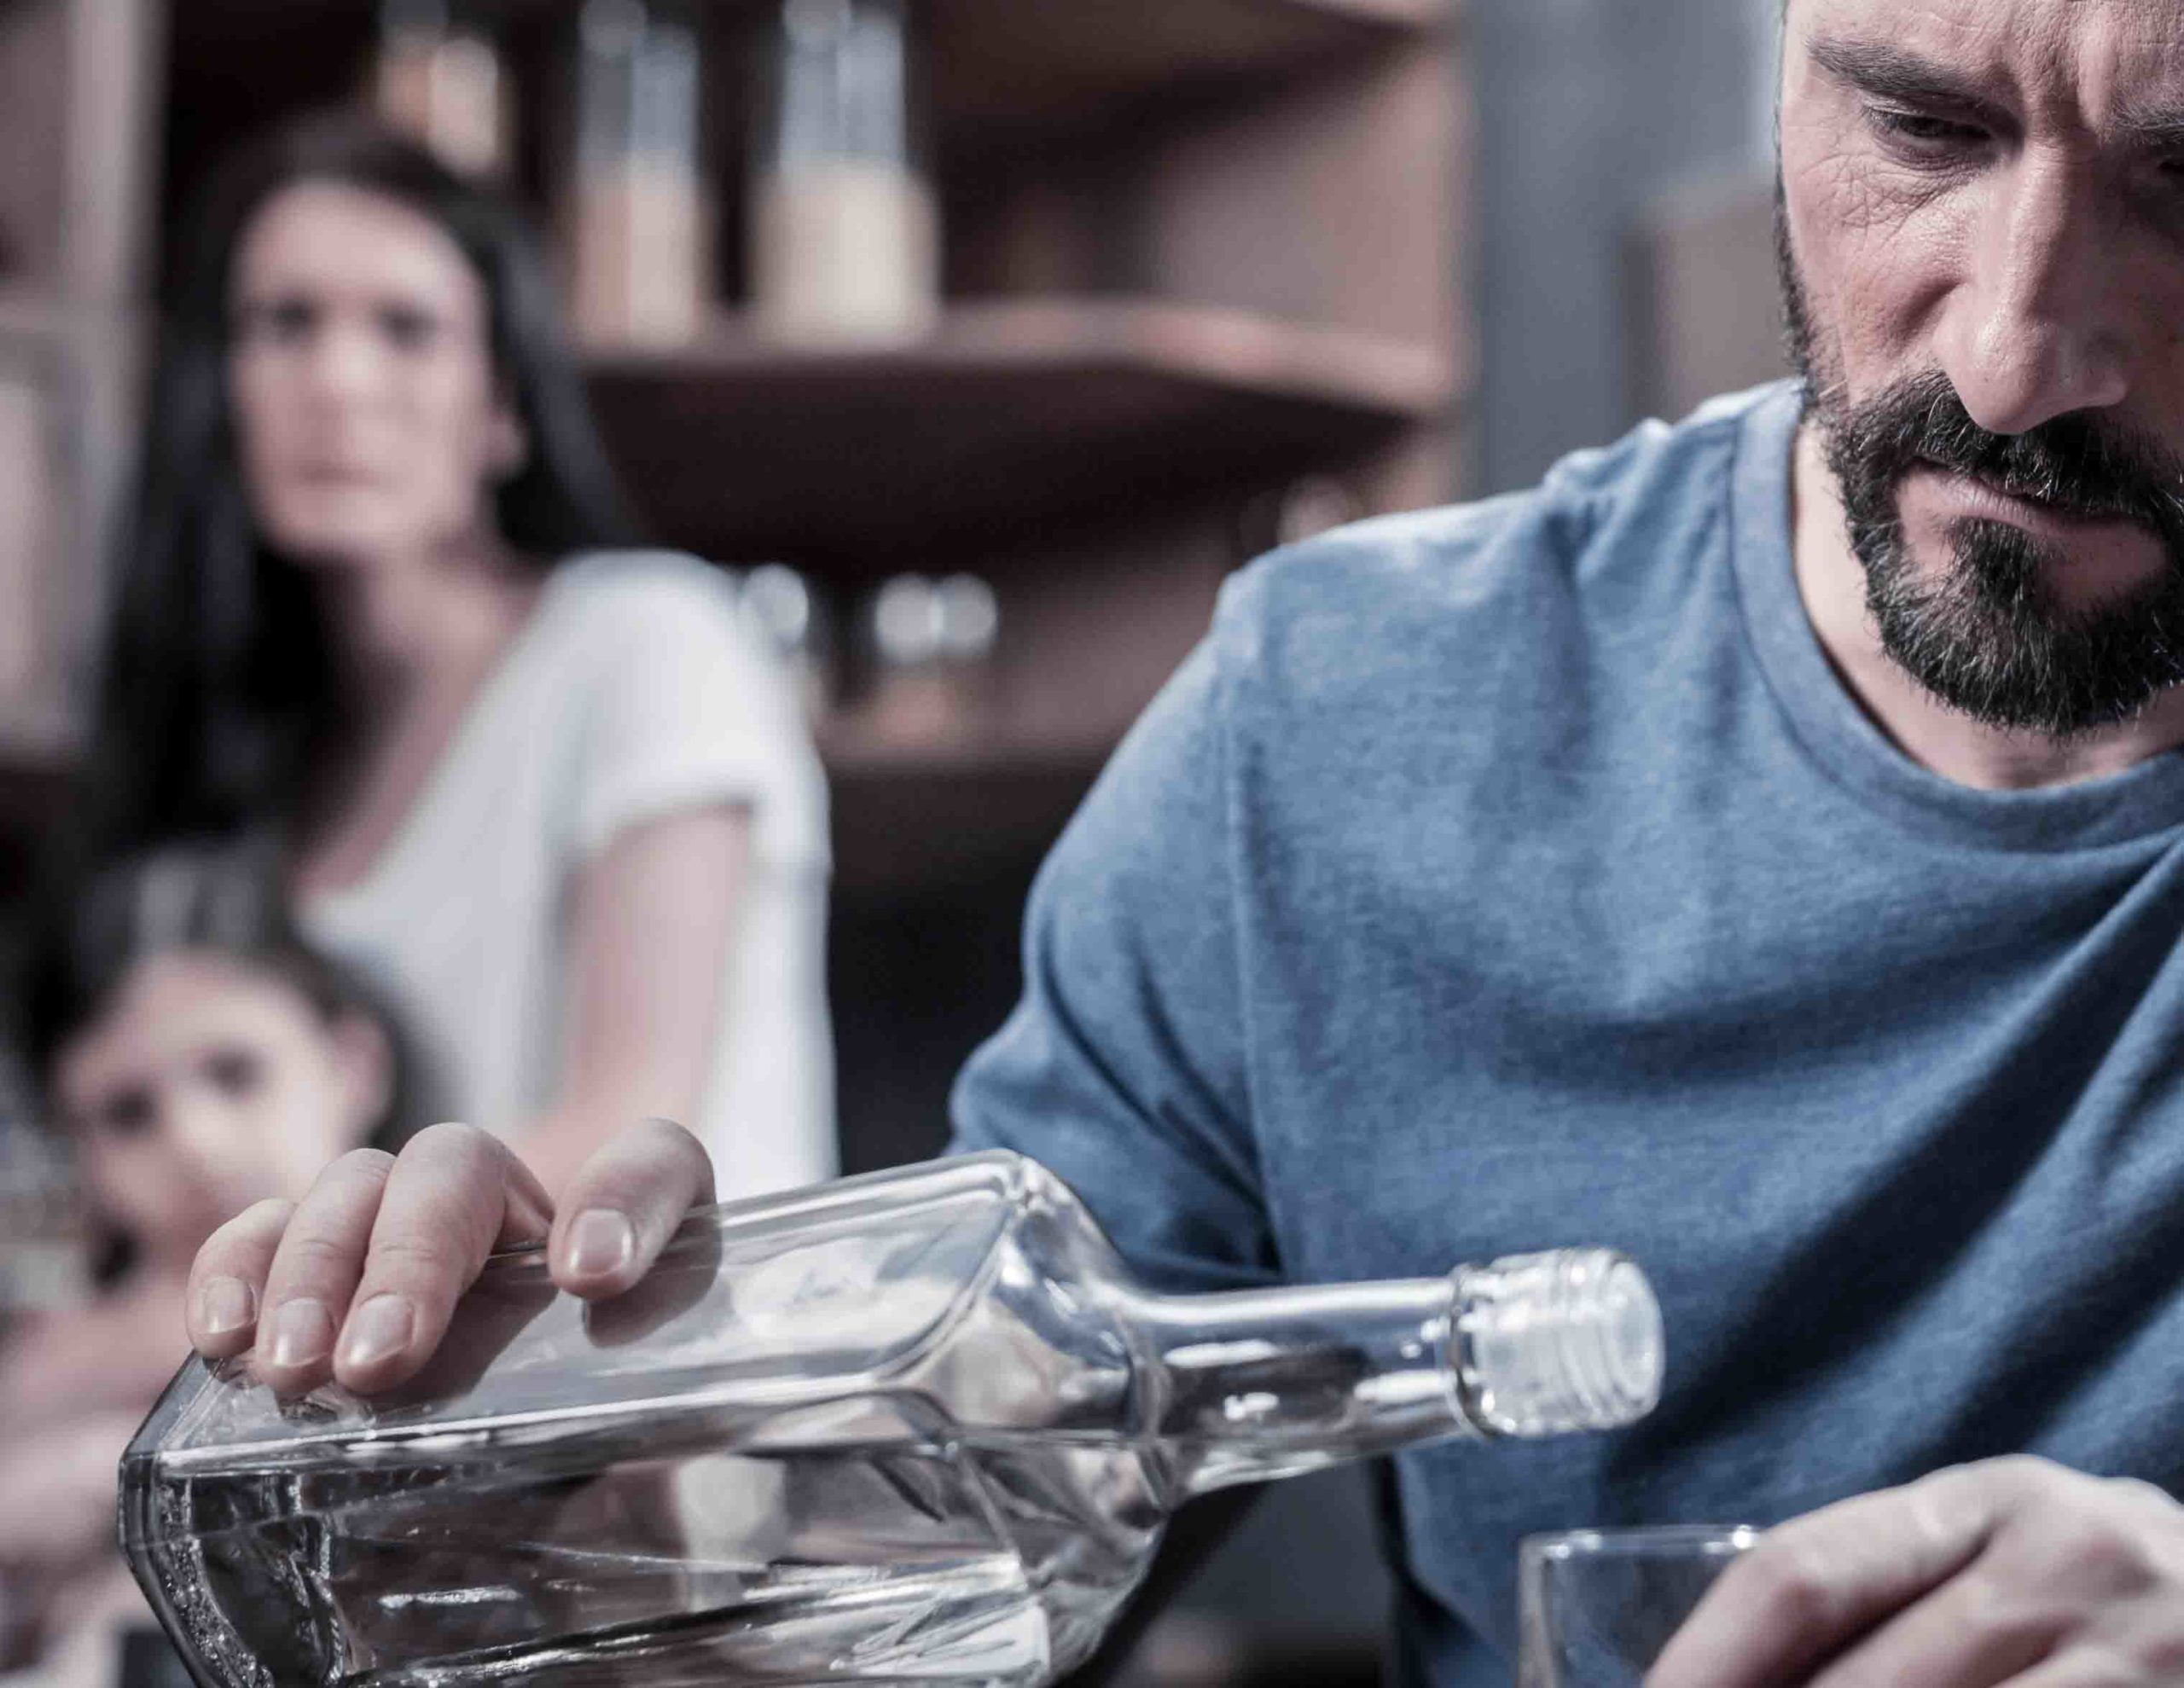 Causes of drug and alcohol addiction